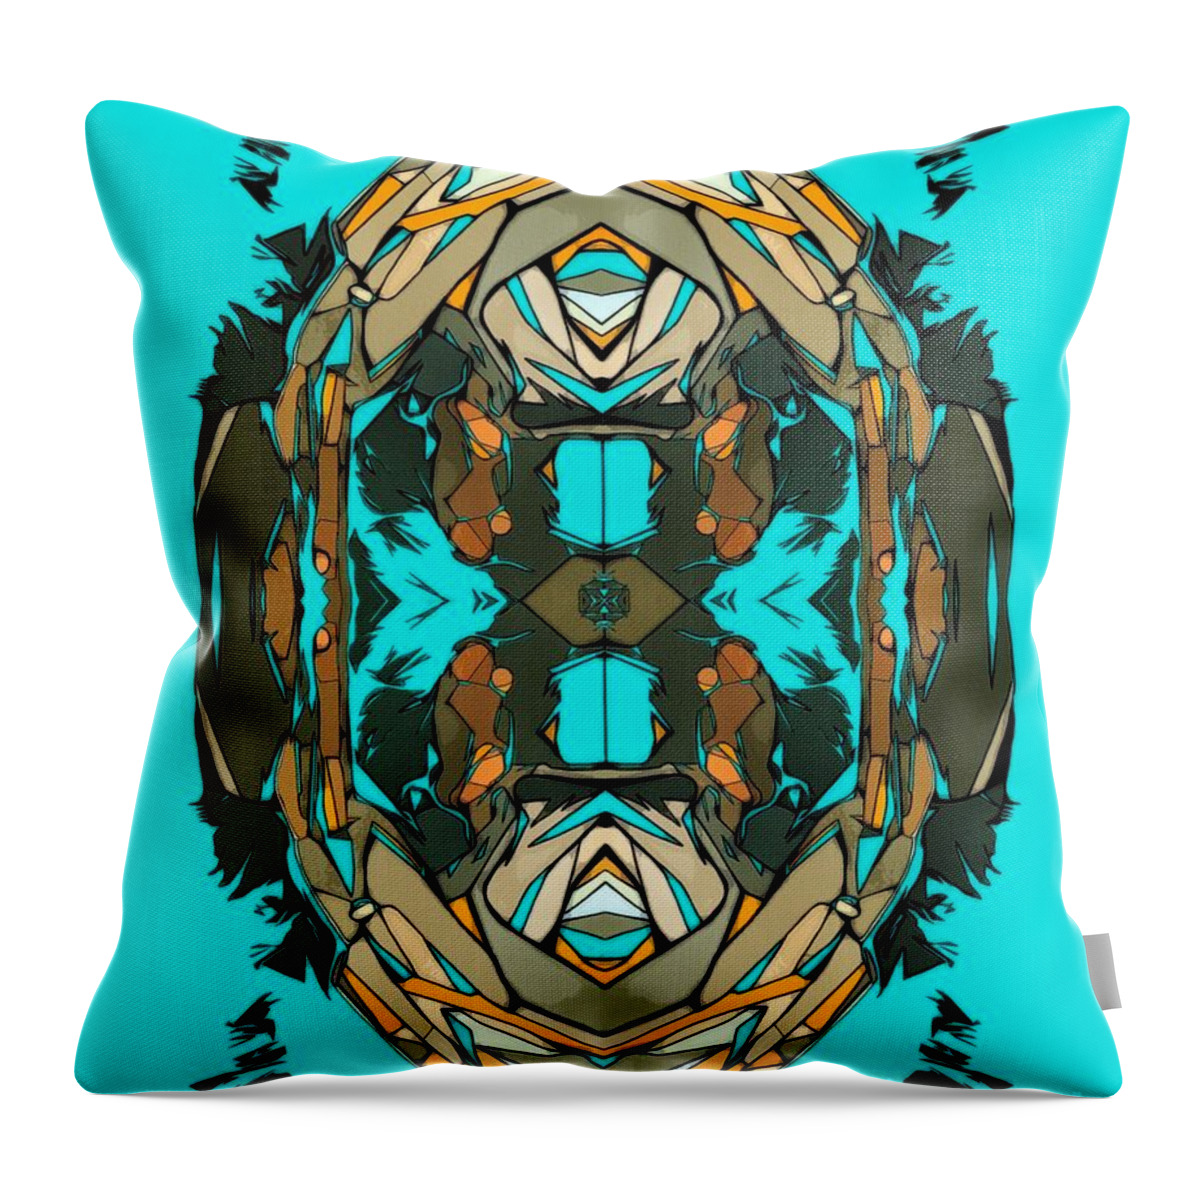 Abstract Art Throw Pillow featuring the digital art Southwest Abstract by Diana Rajala